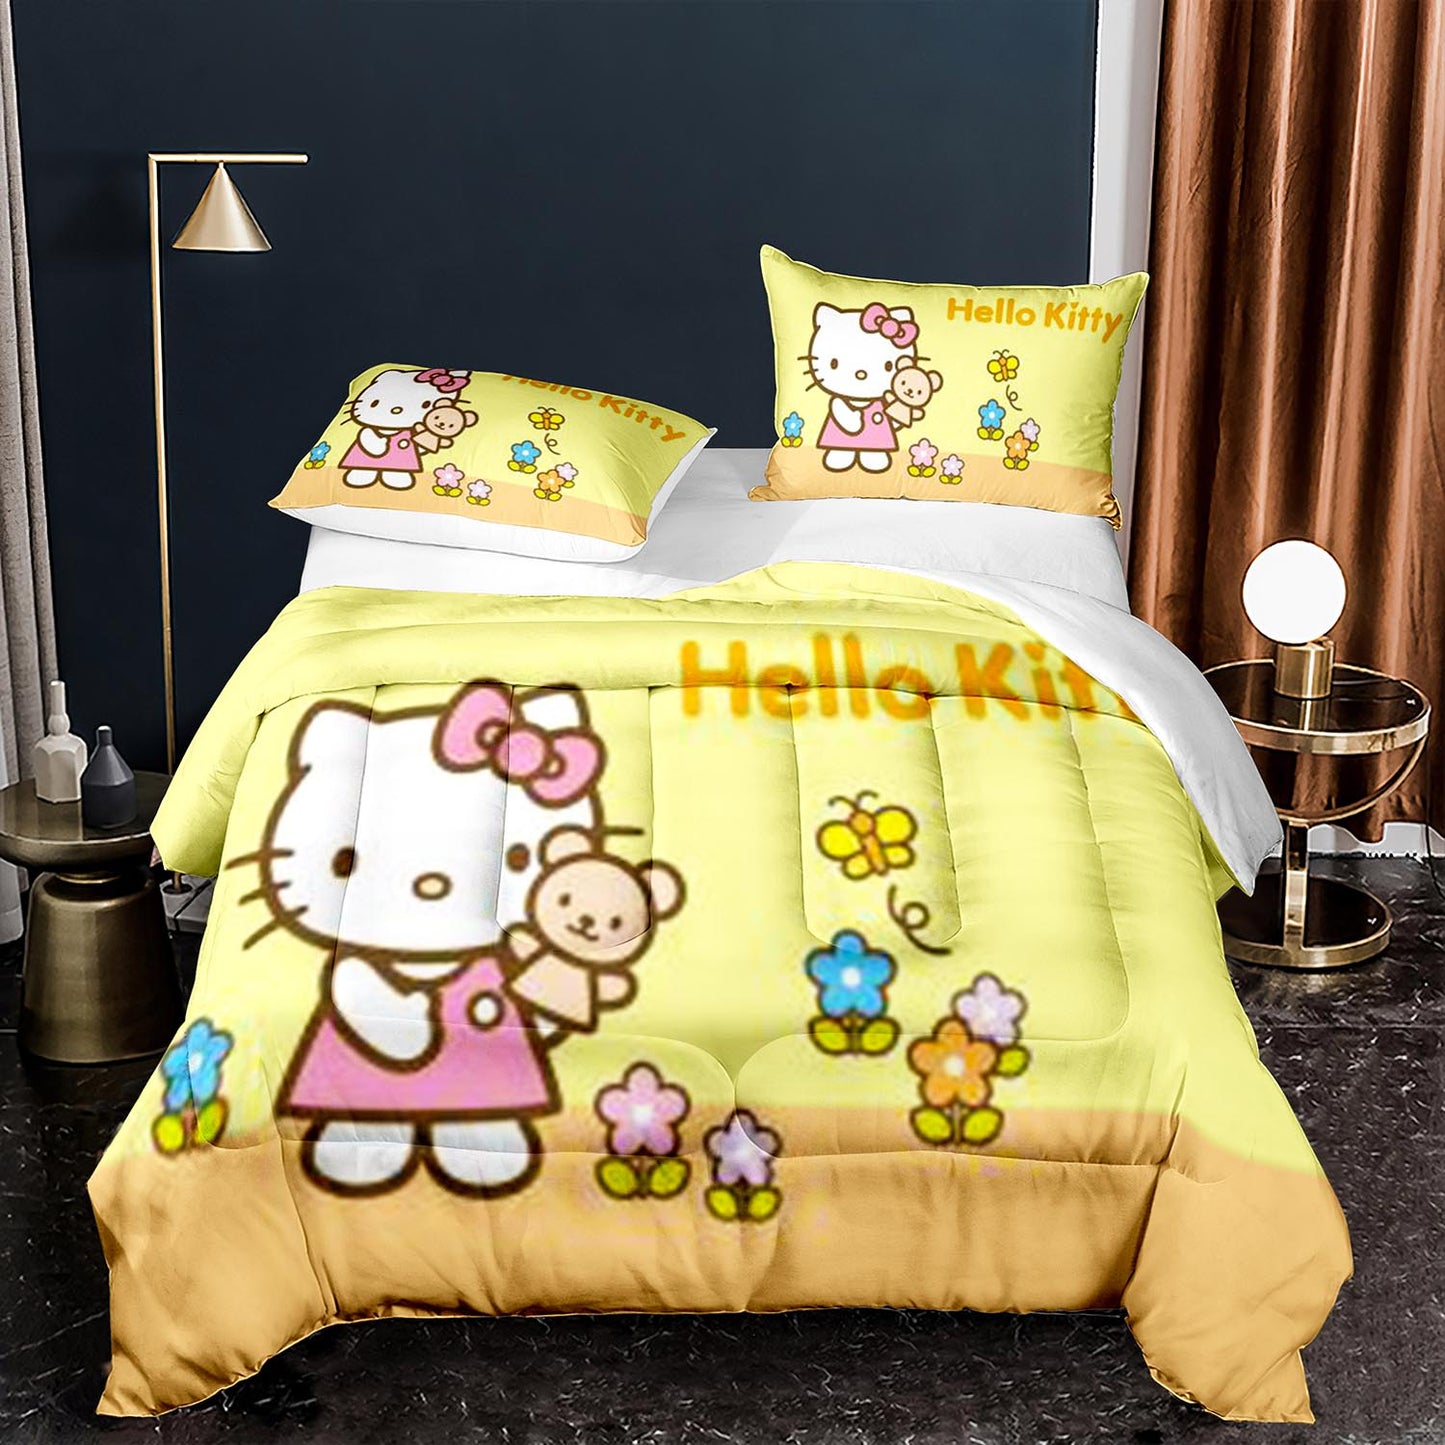 Cute hello kitty comforter and bedsheet for kids